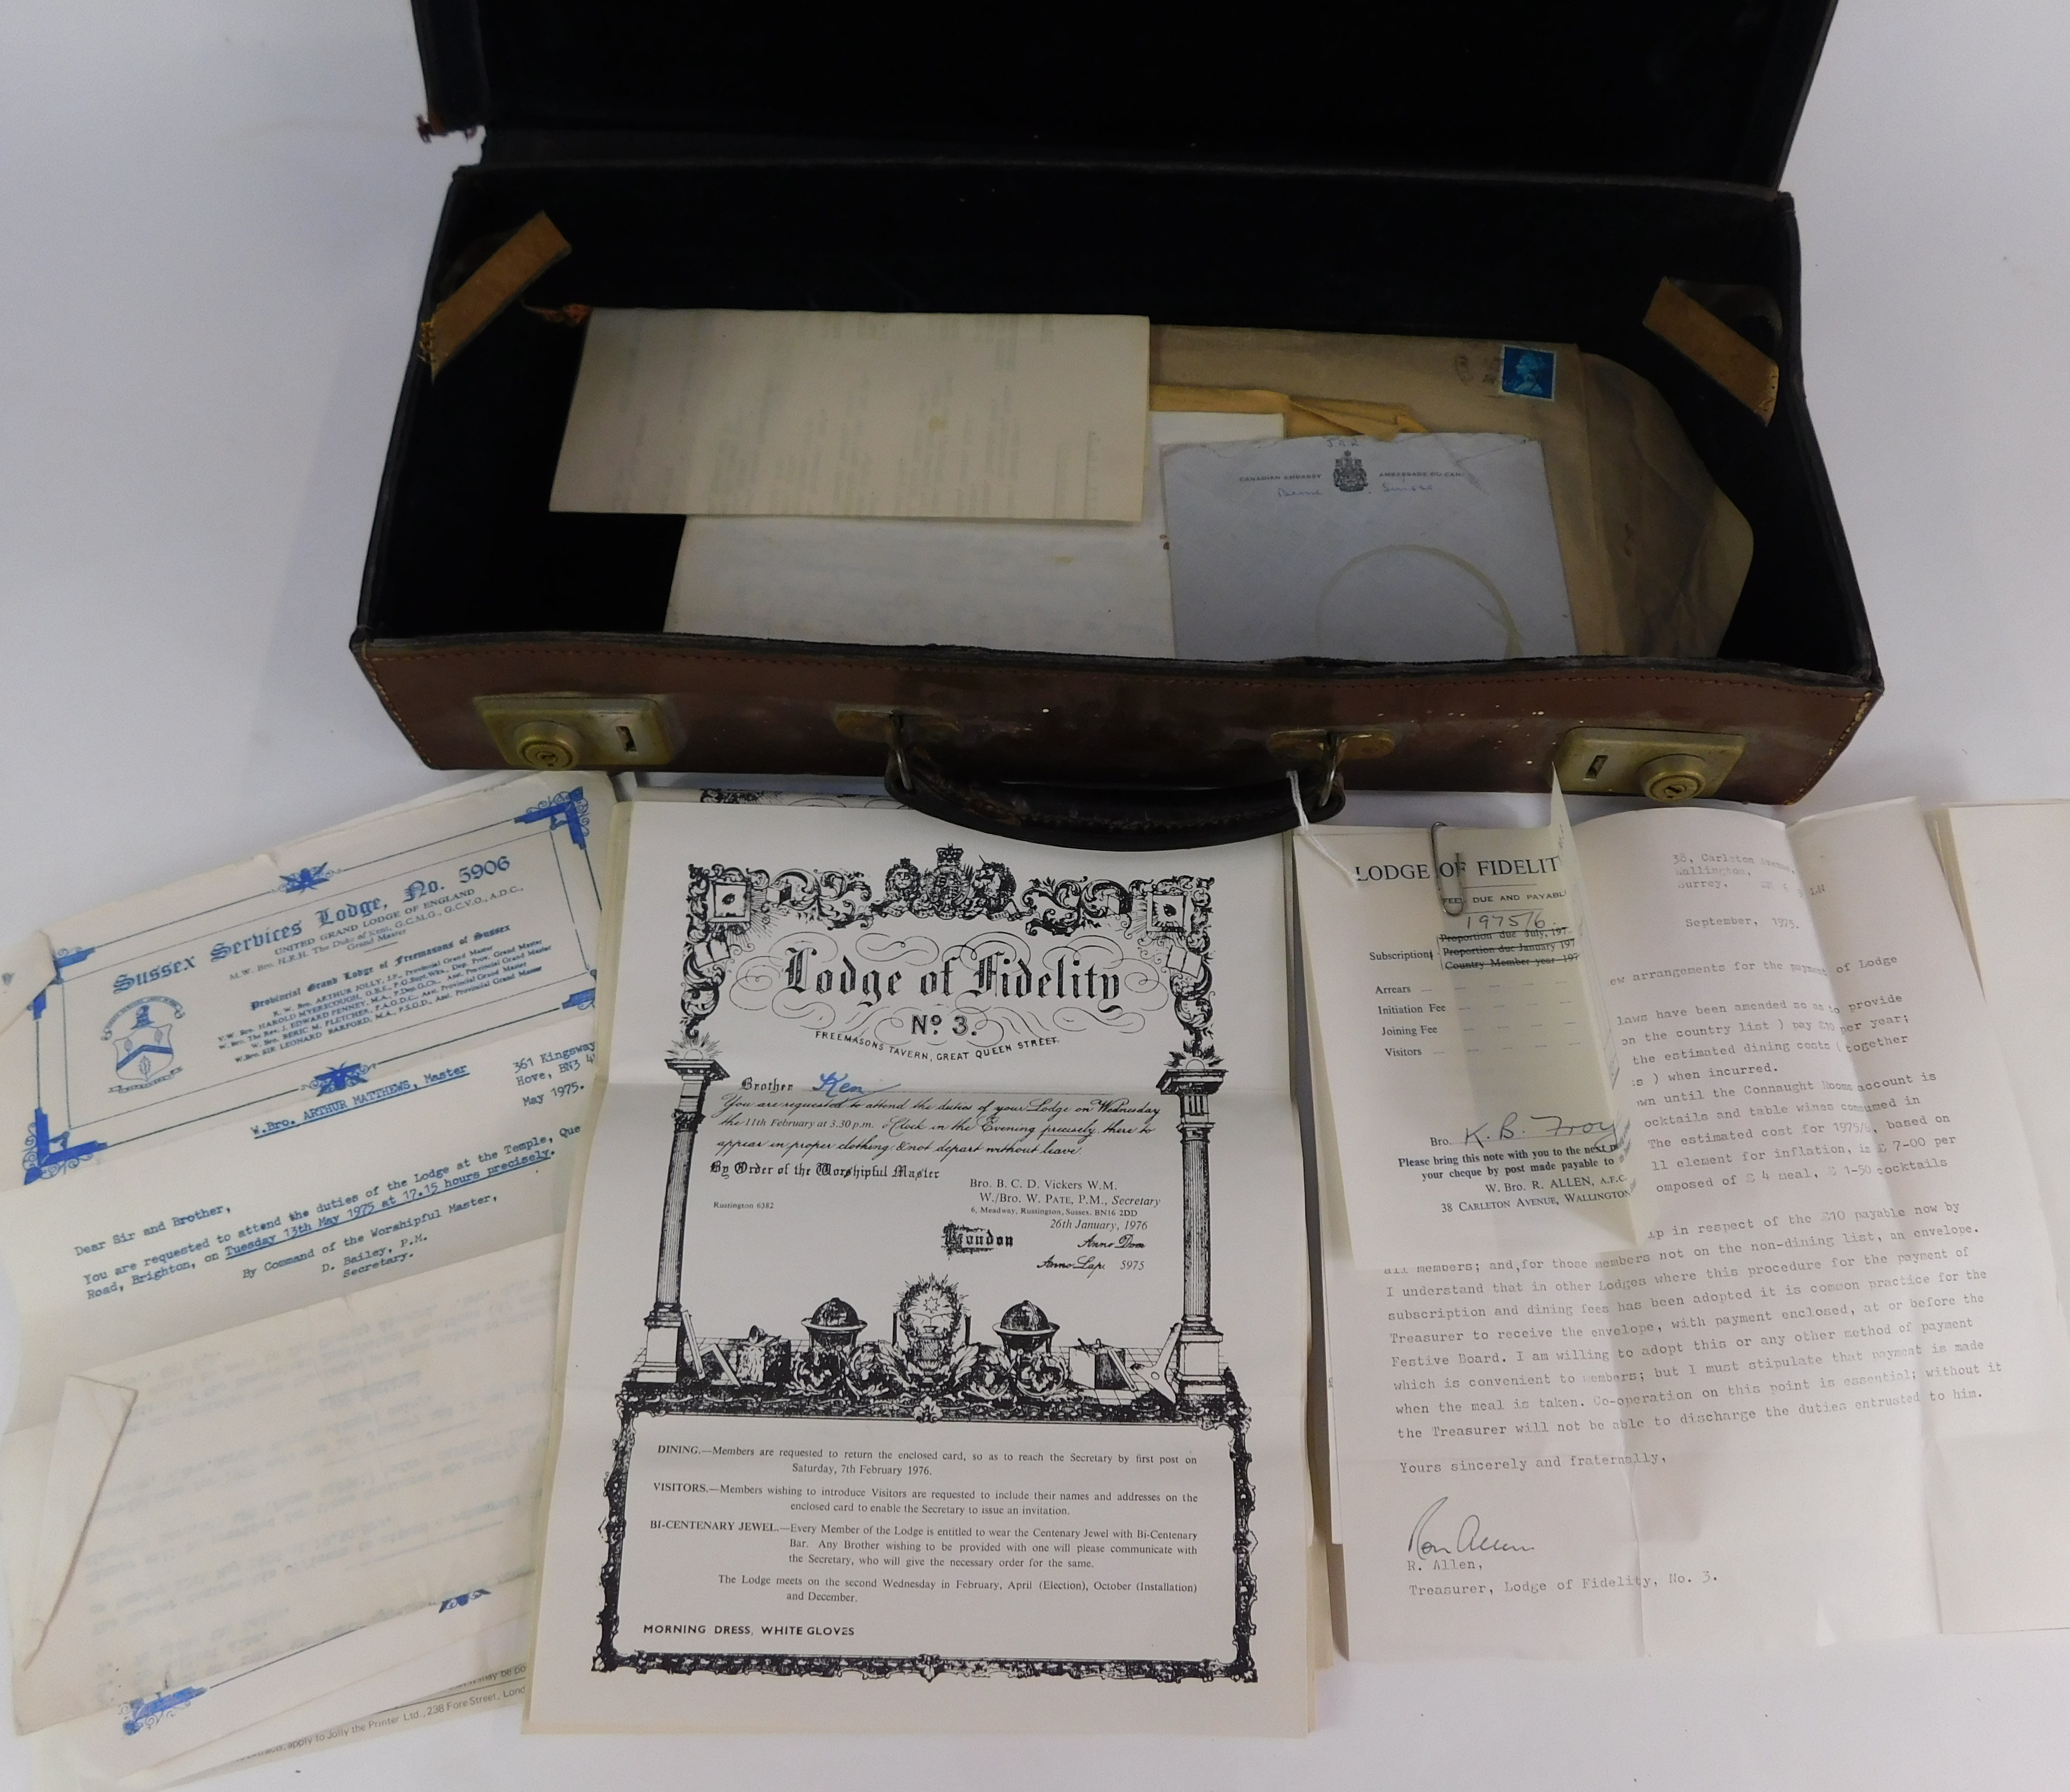 A leather case containing Masonic related items, aprons etc. - Image 4 of 4